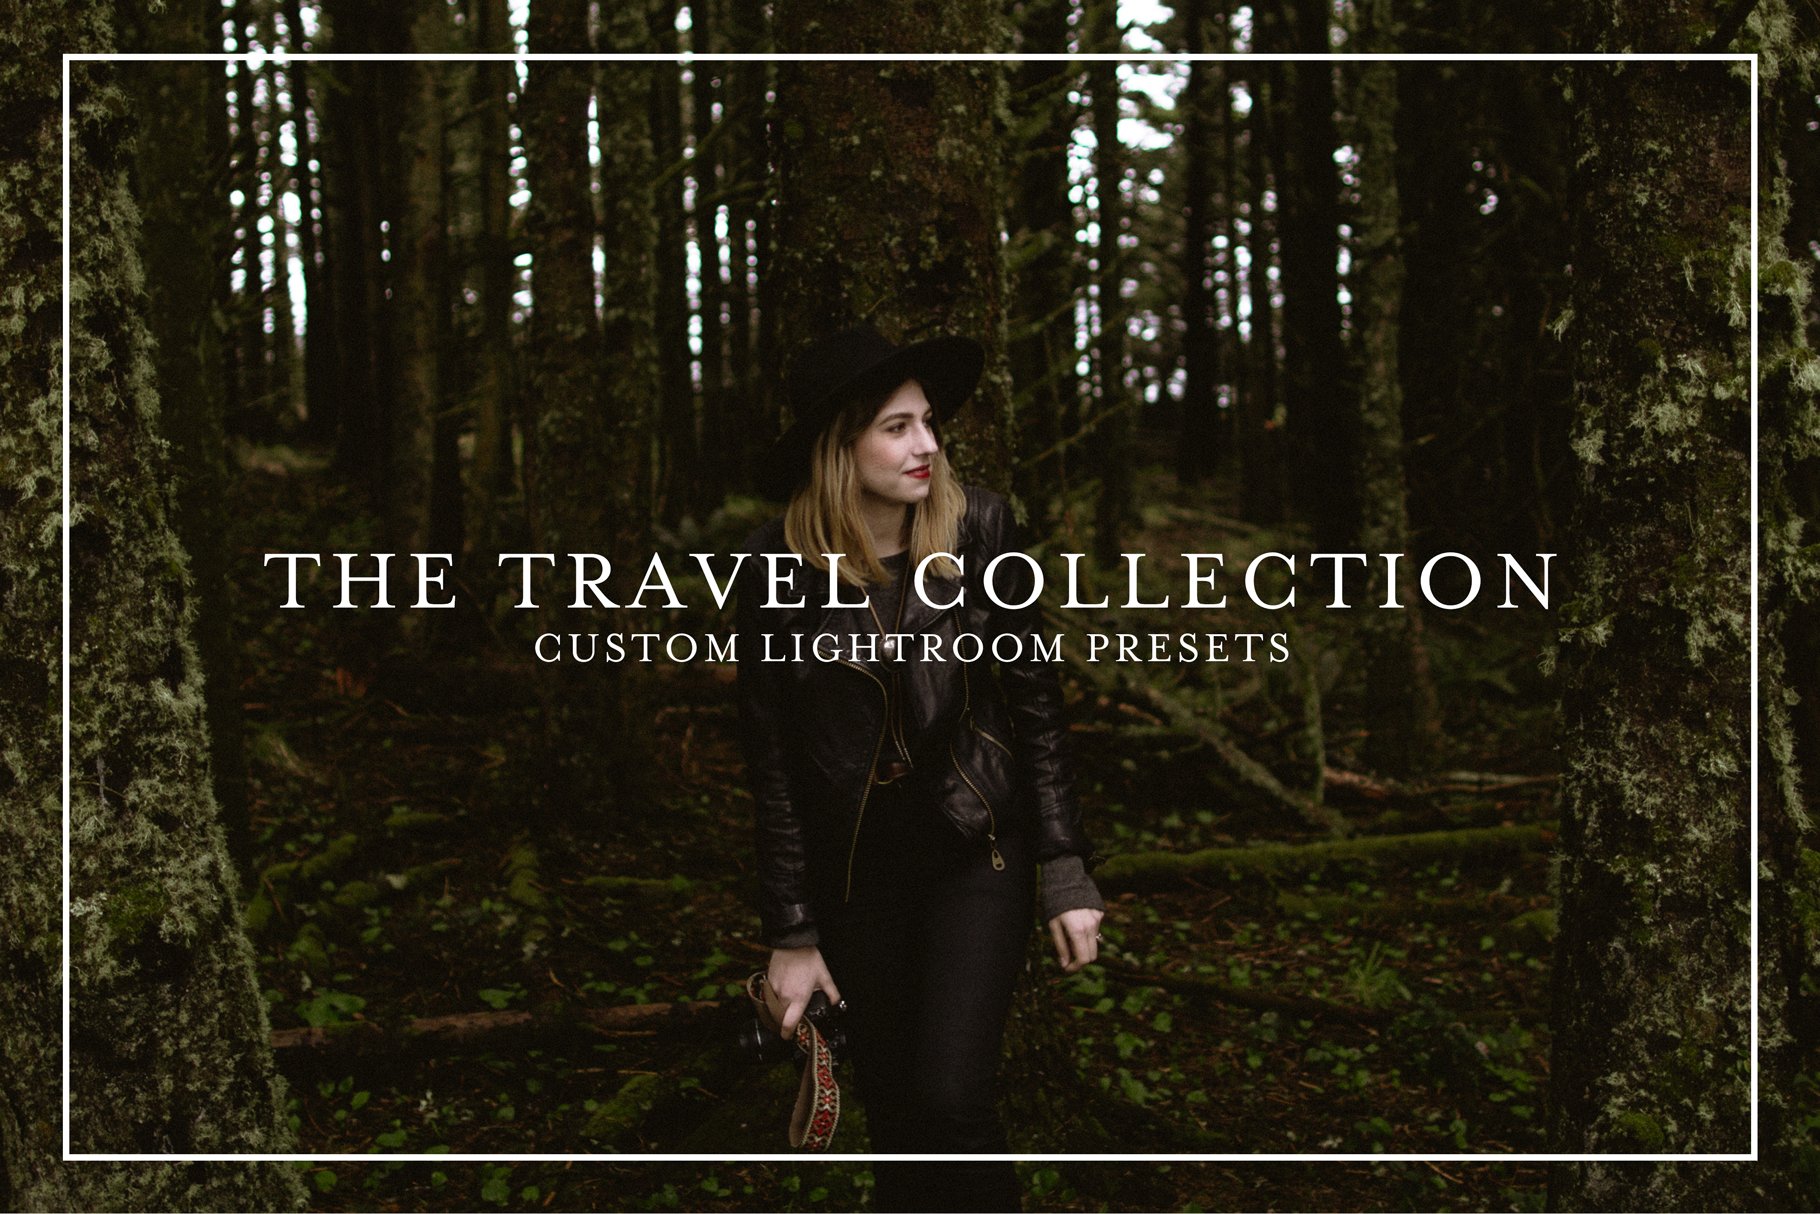 The Travel Collection – Preset Packcover image.